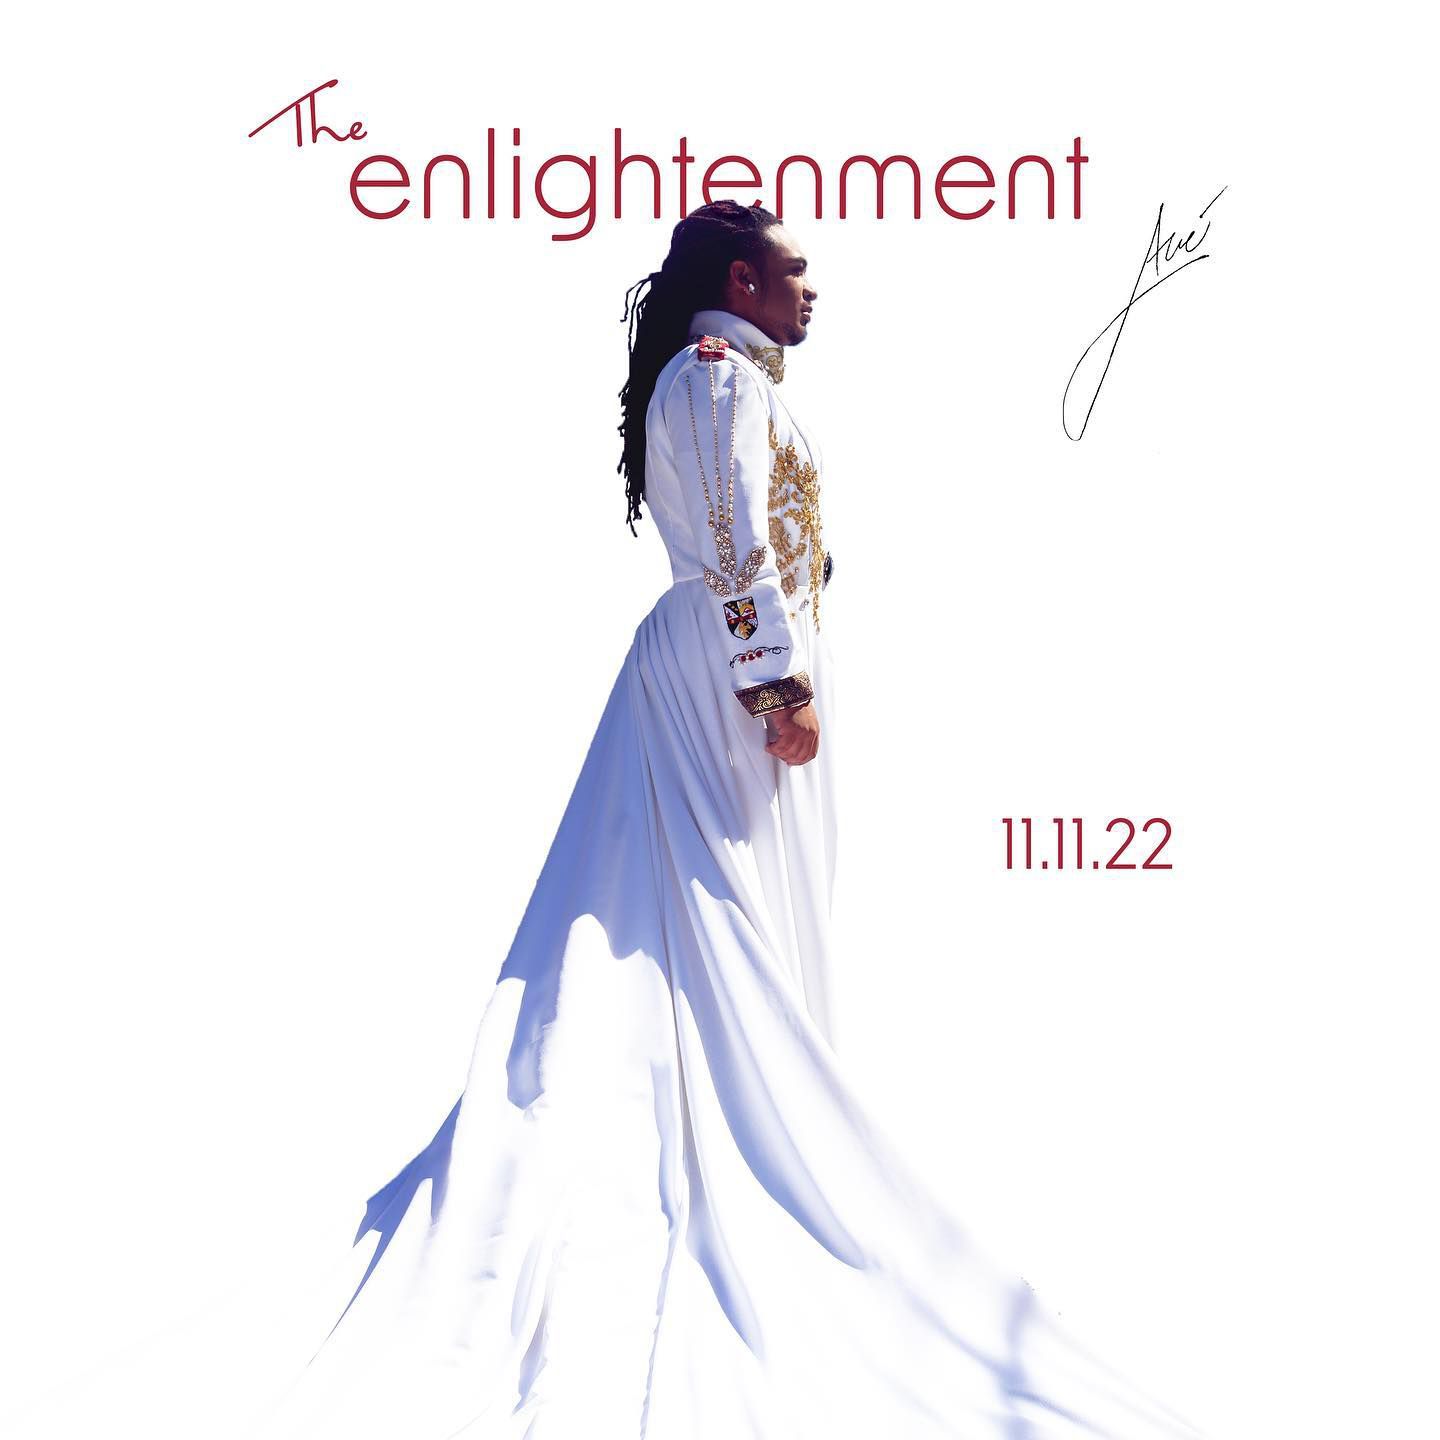 Avé has recently dropped a new EP: The Enlightenment